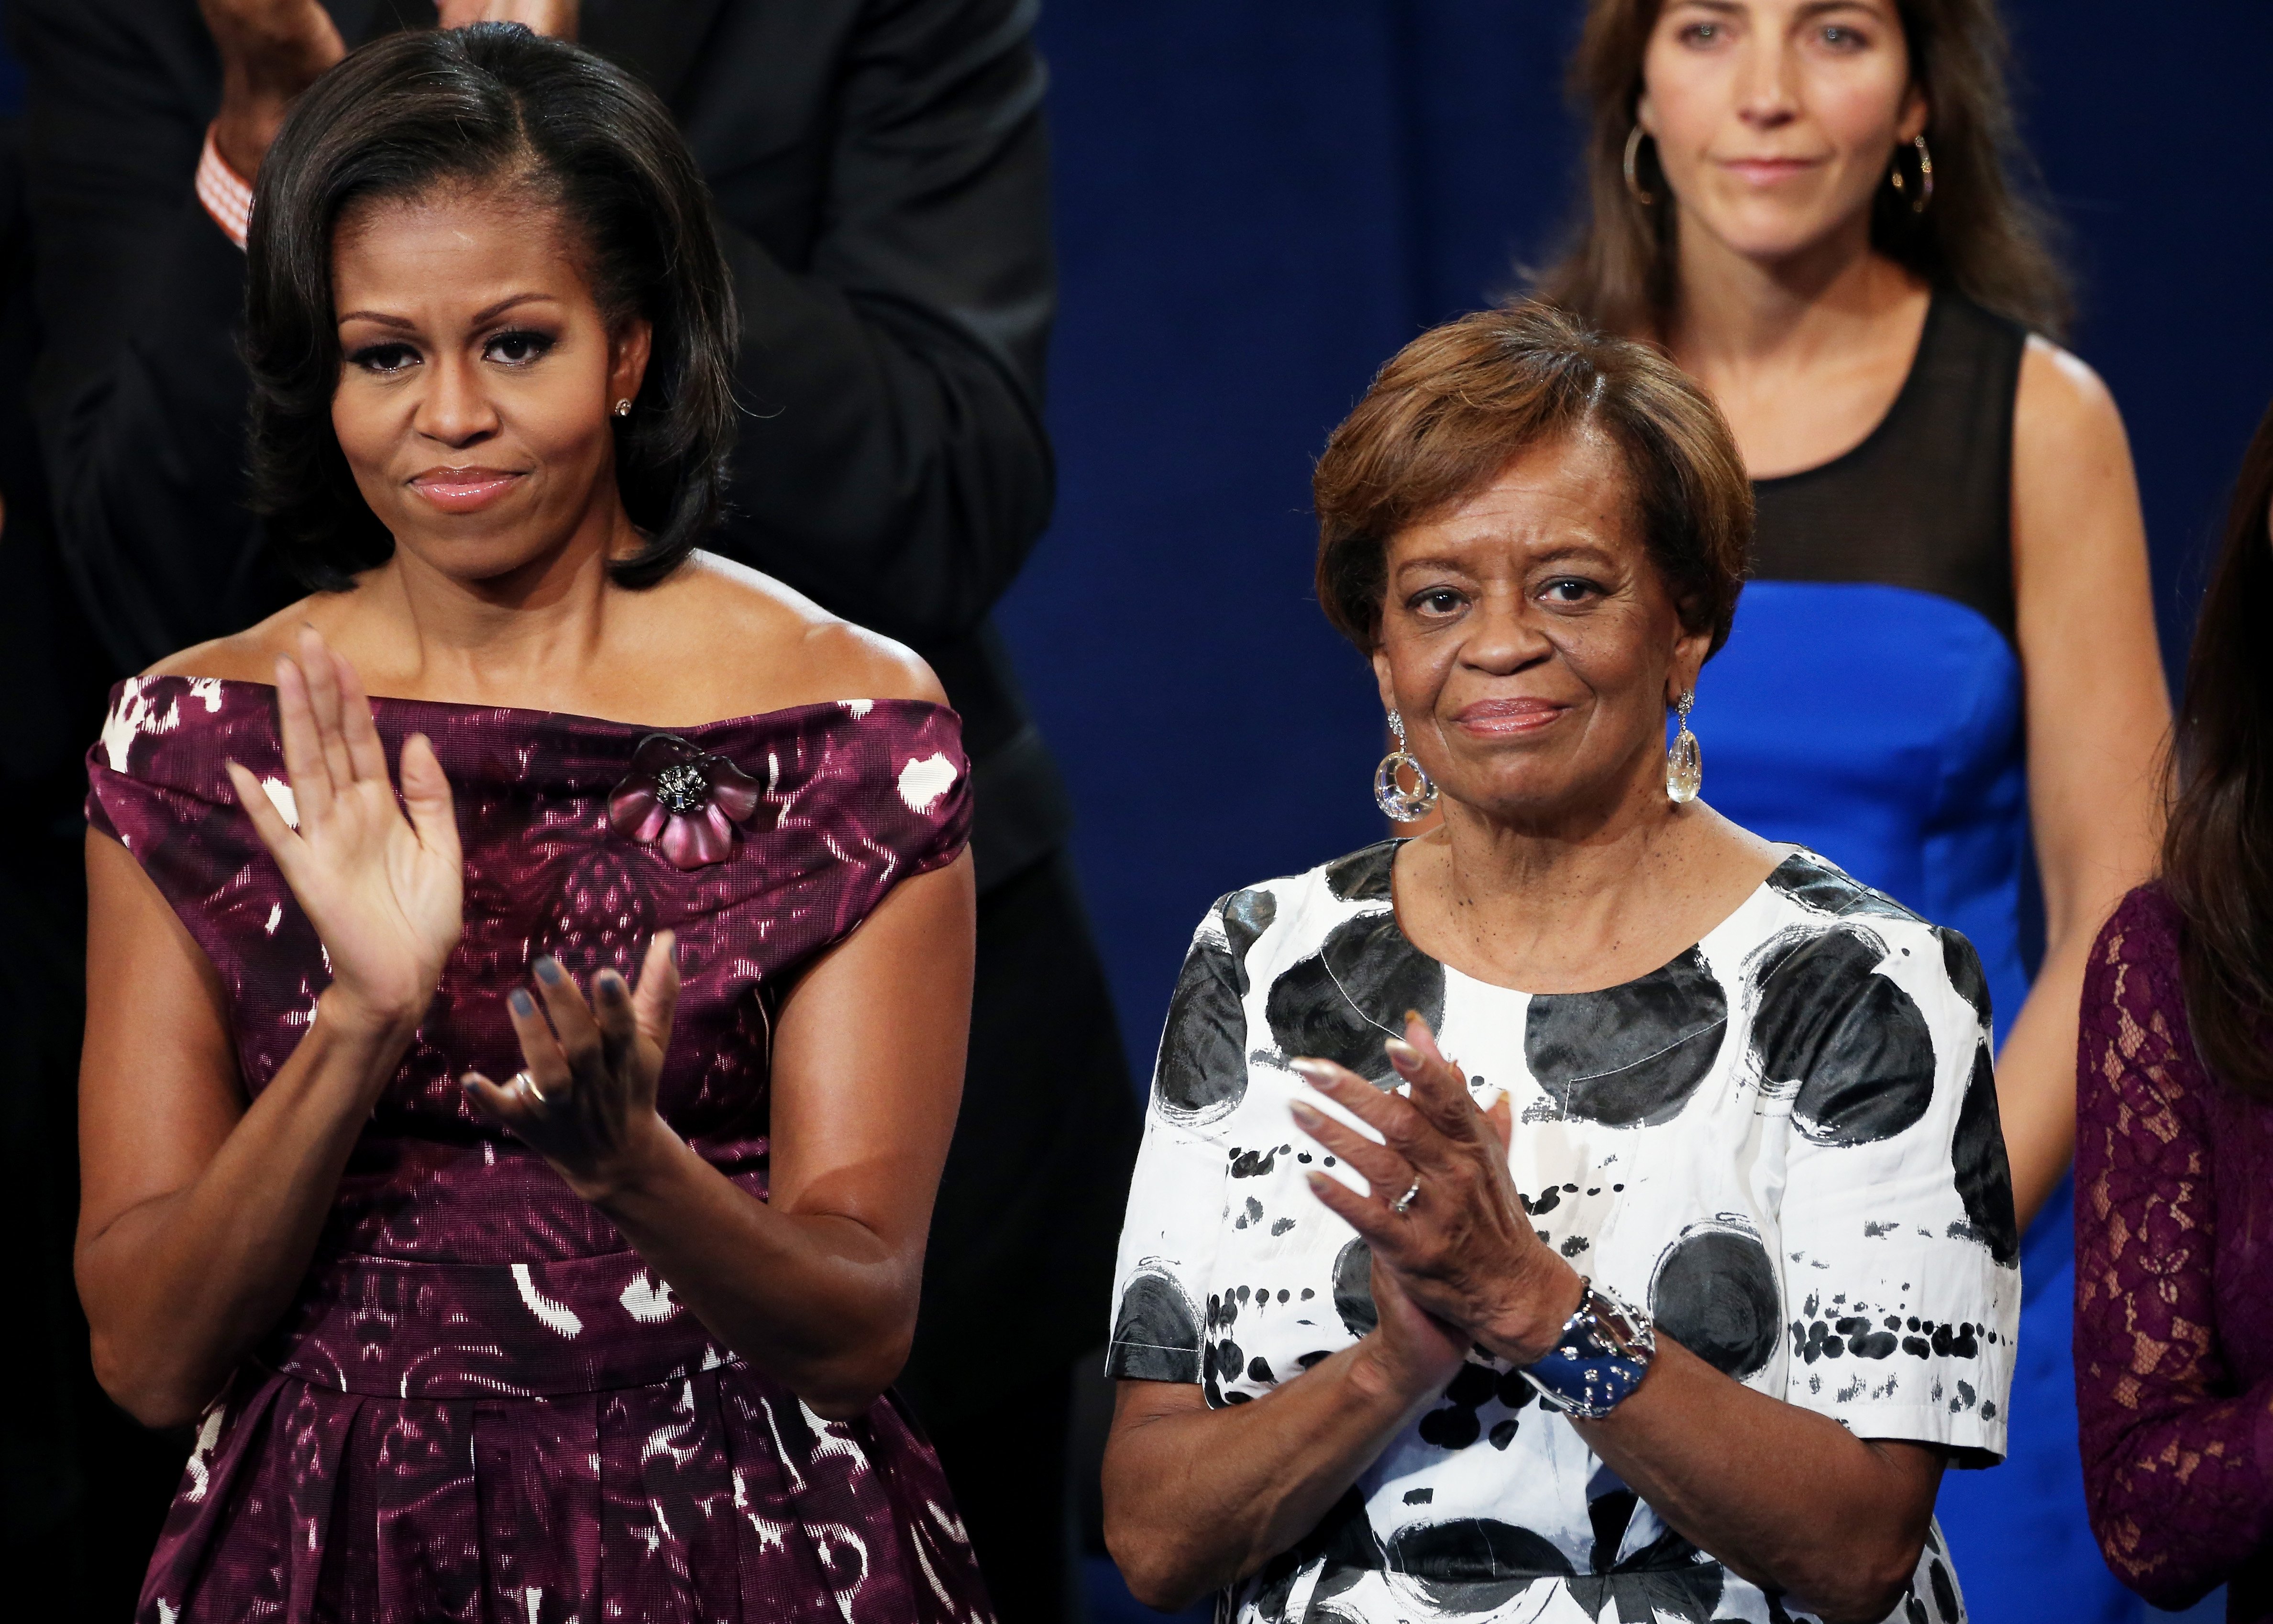 Michelle Obama with her mother Marian Robinson during the Democratic National Convention at Time Warner Cable Arena on September 6, 2012 | Photo: GettyImages